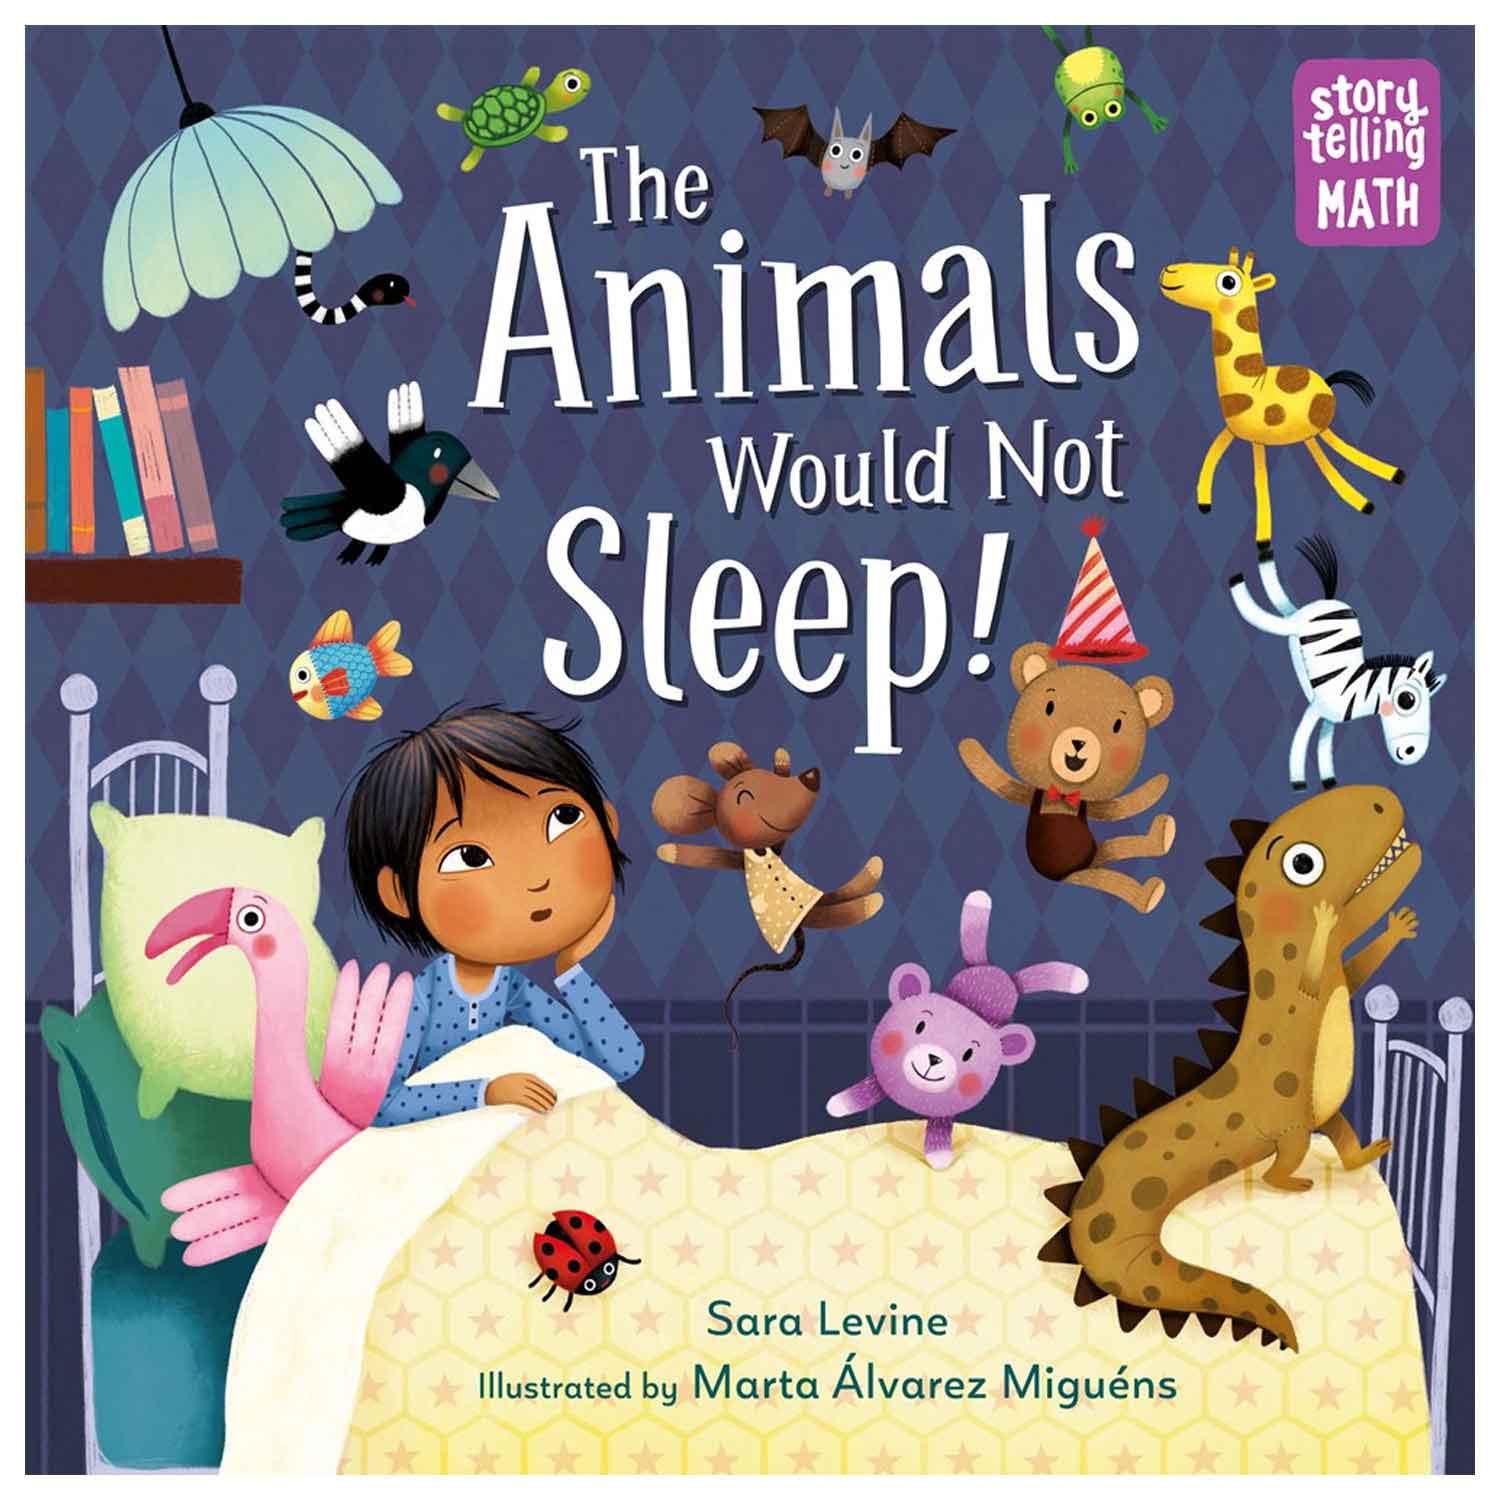 Storytelling Math: The Animals Would Not Sleep!